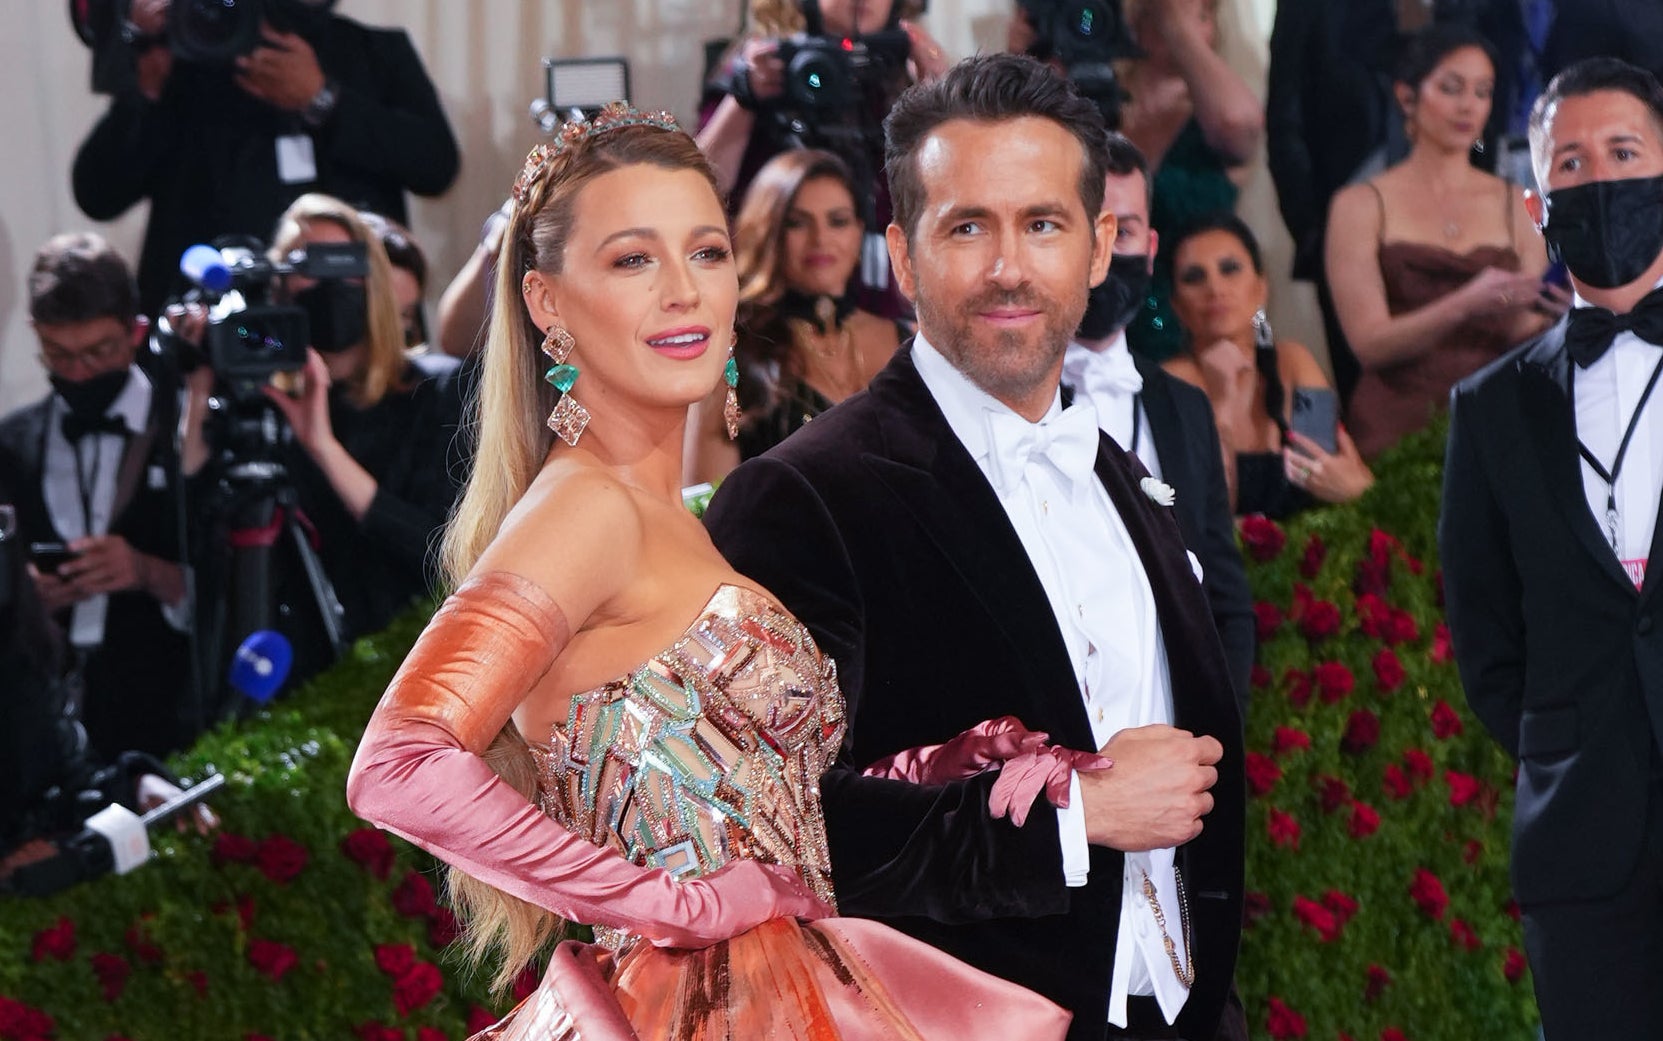 Blake Lively and Ryan Reynolds attend The Met Gala